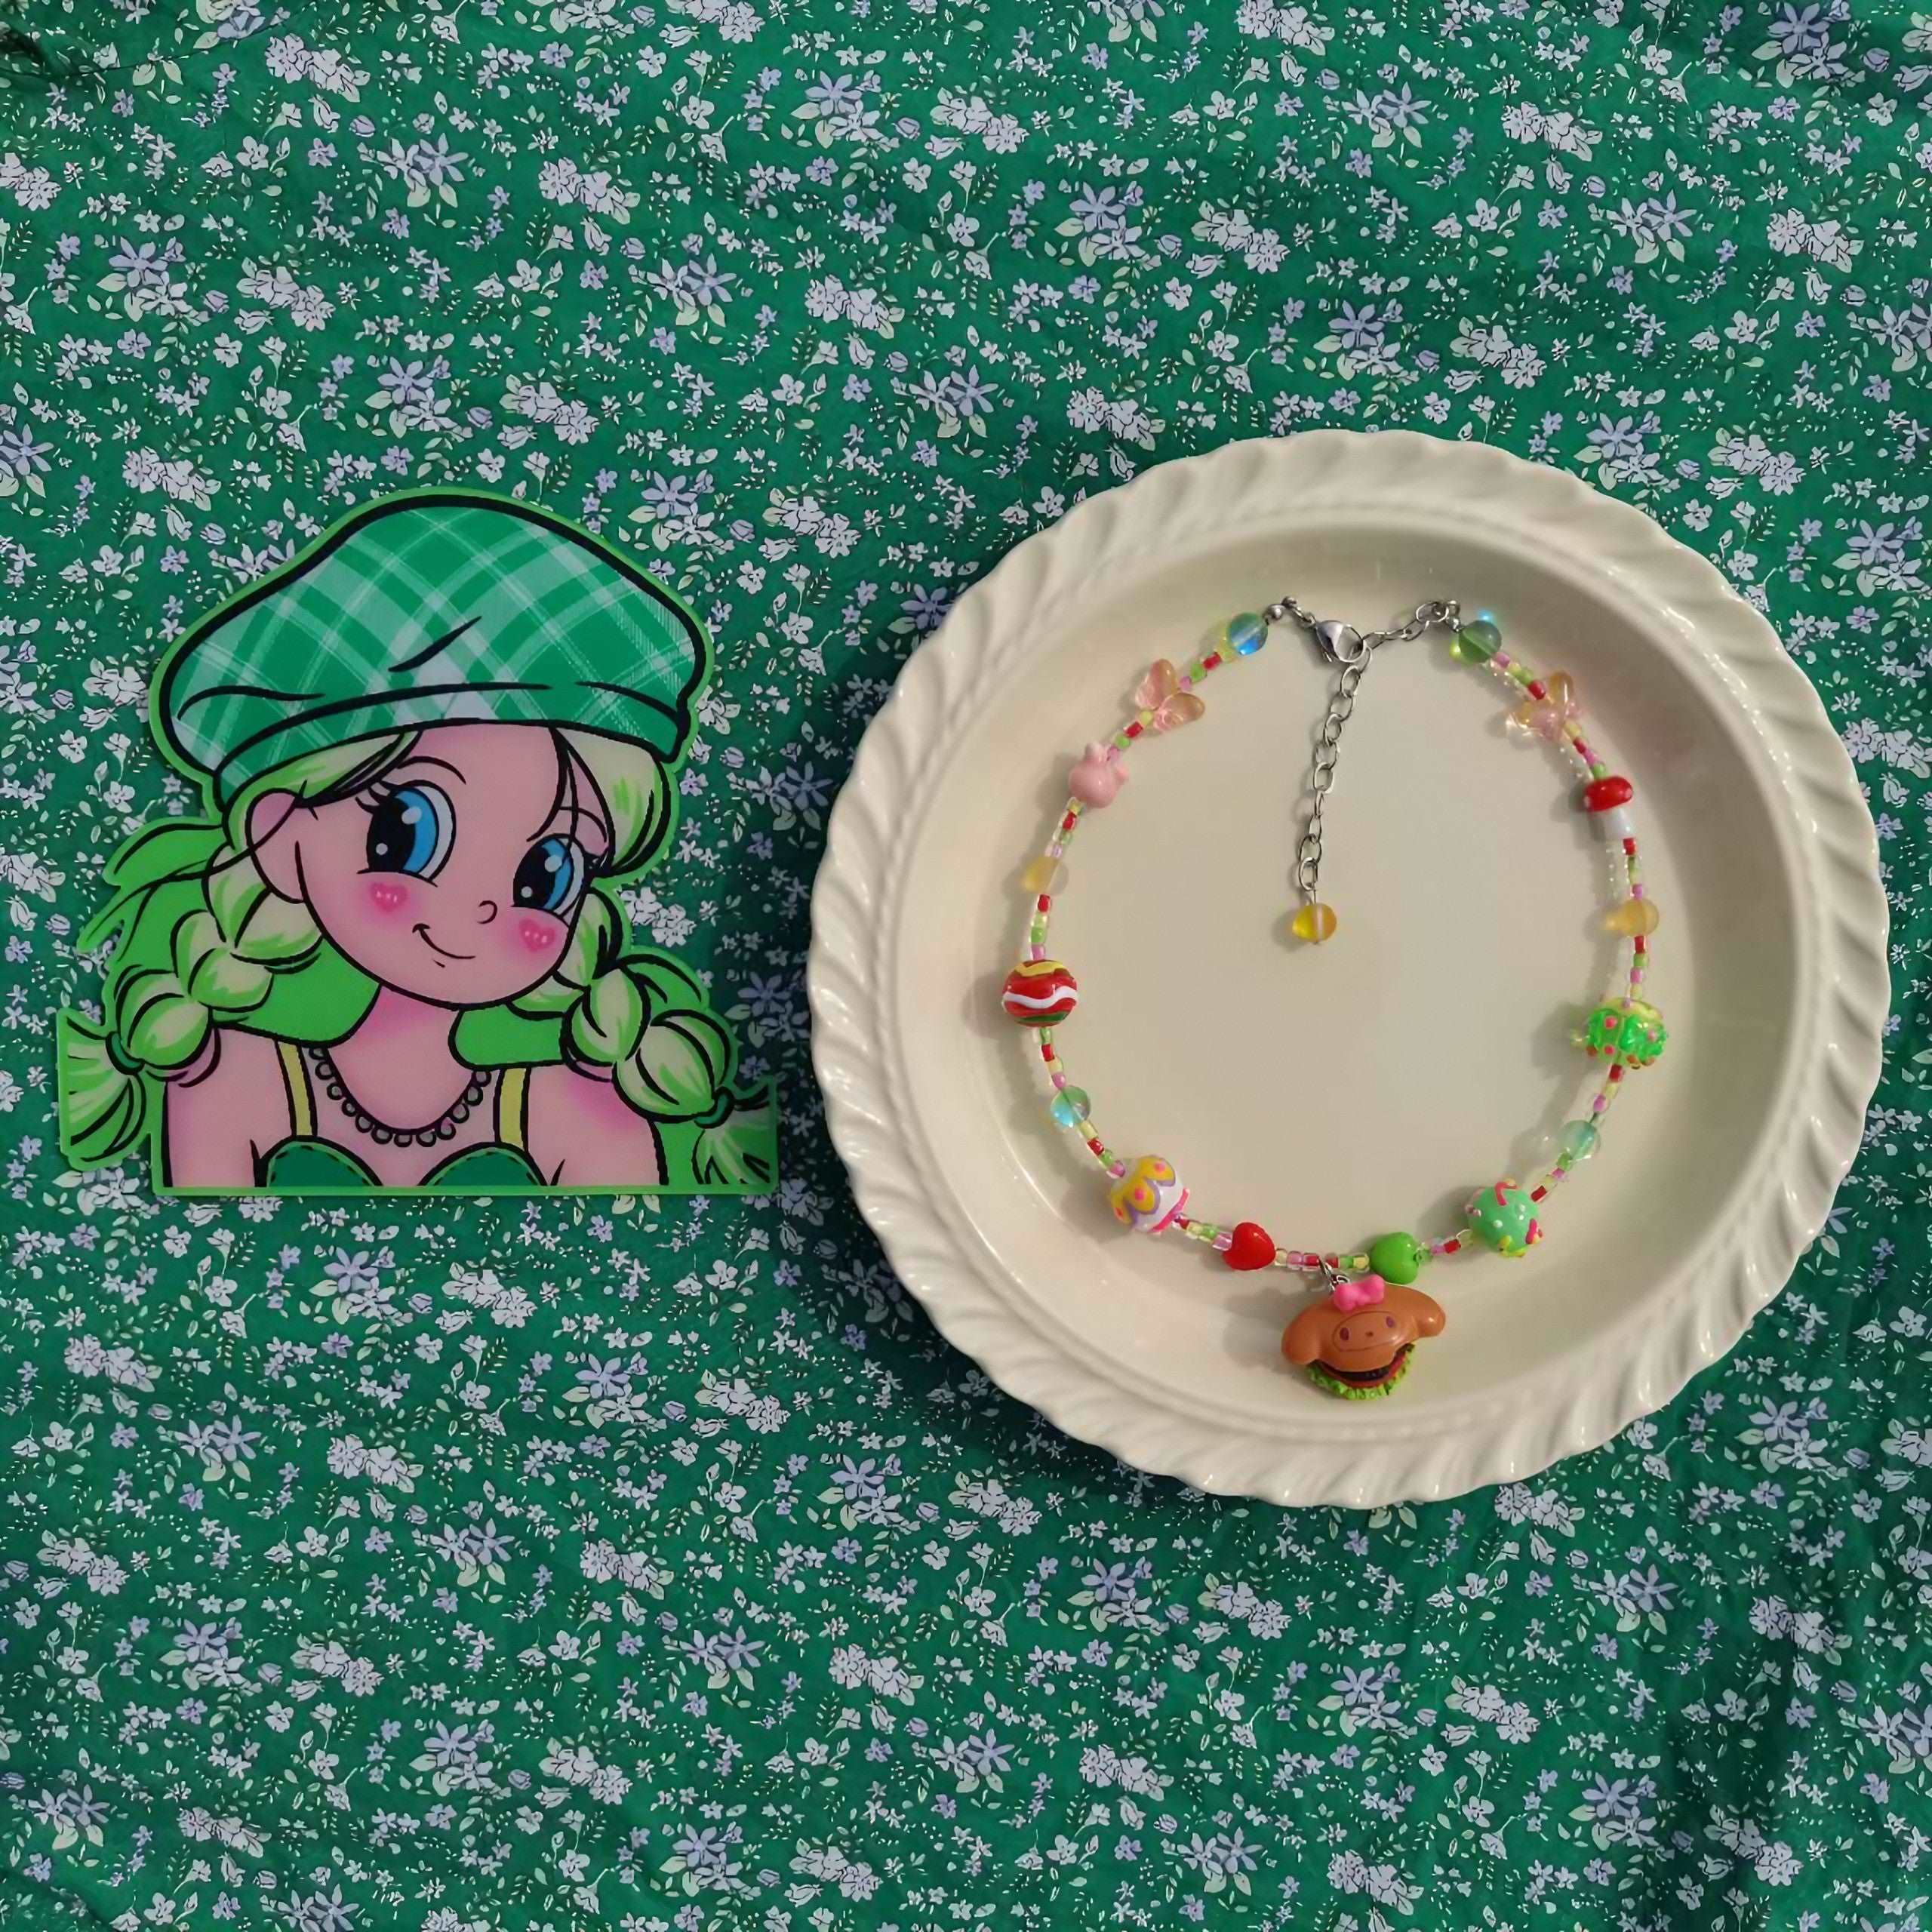 Autumn fashion themed necklace and green hat arranged on a plate